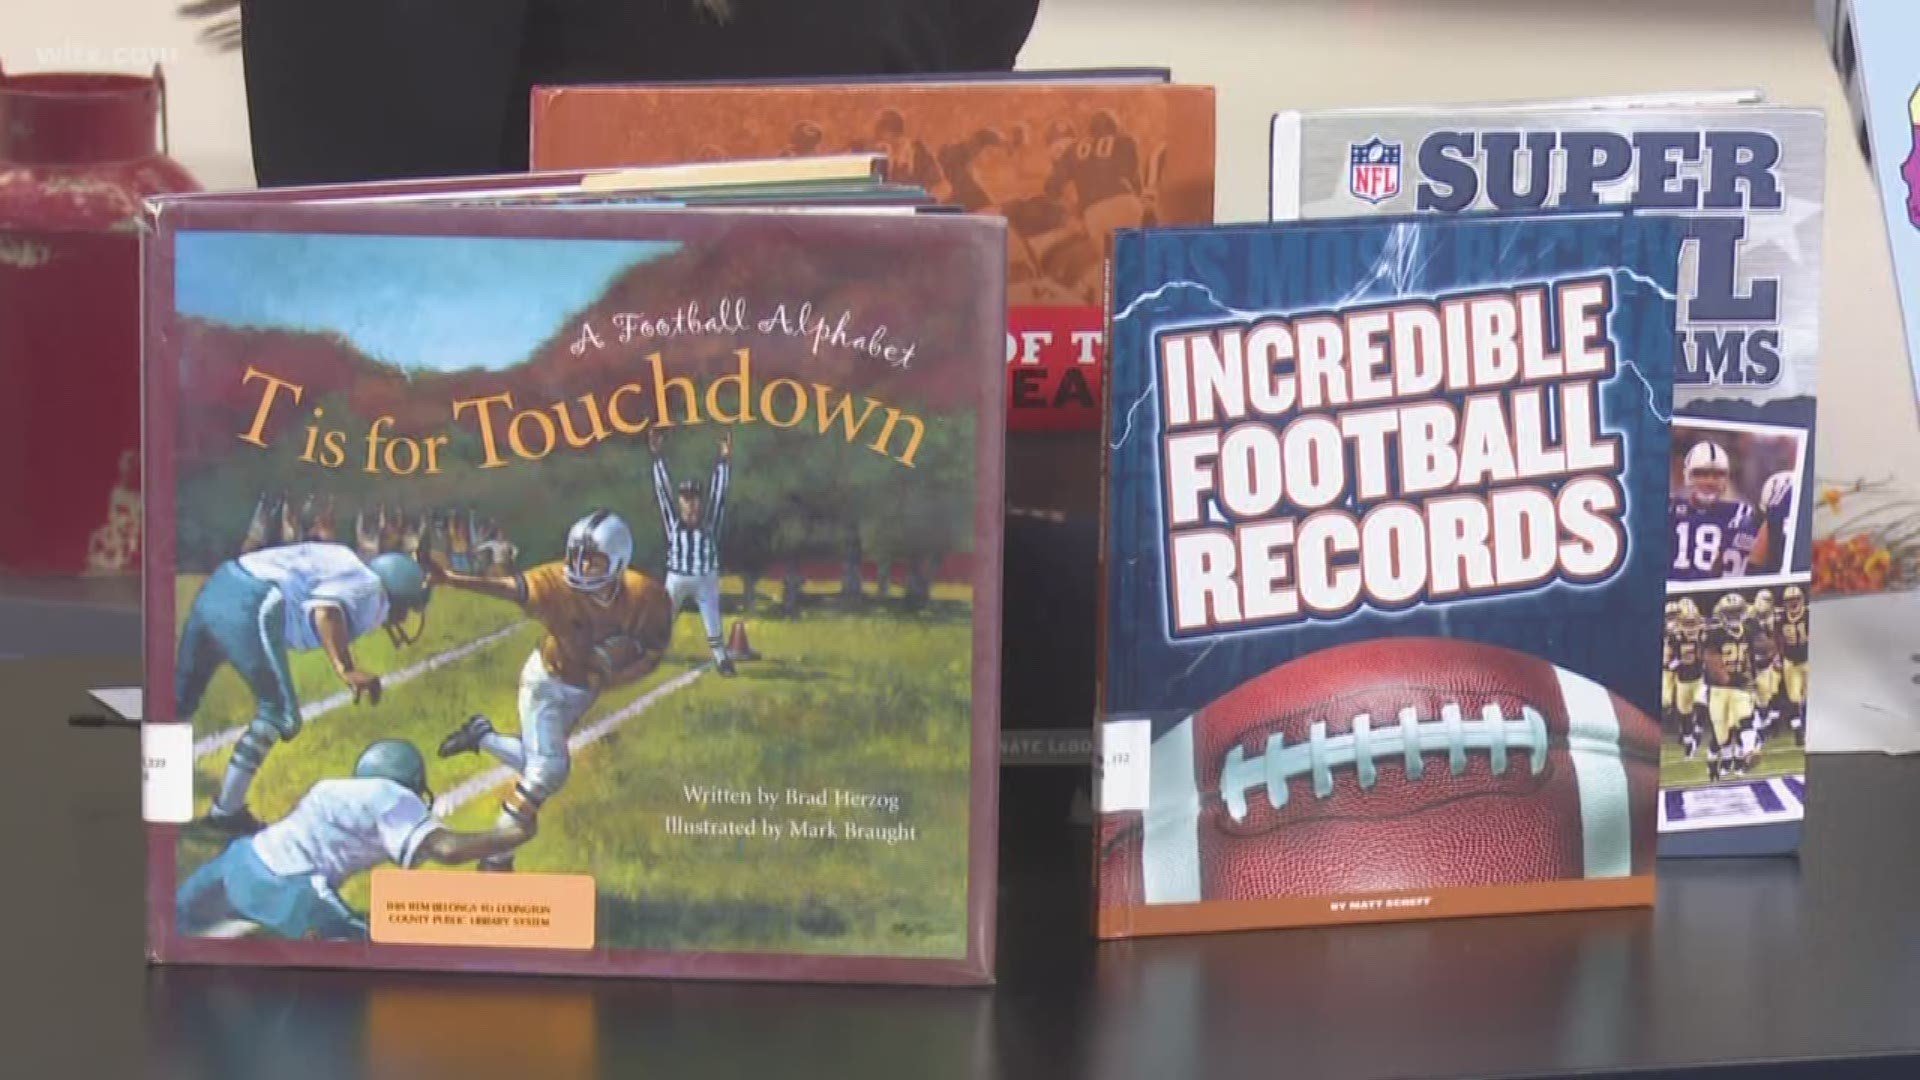 Sunday doesn't need to be entirely about football. Cynthia Hacker, of Sylvan Learning Center, stopped by to offer up some ideas on how to turn the event into a fun tutorial